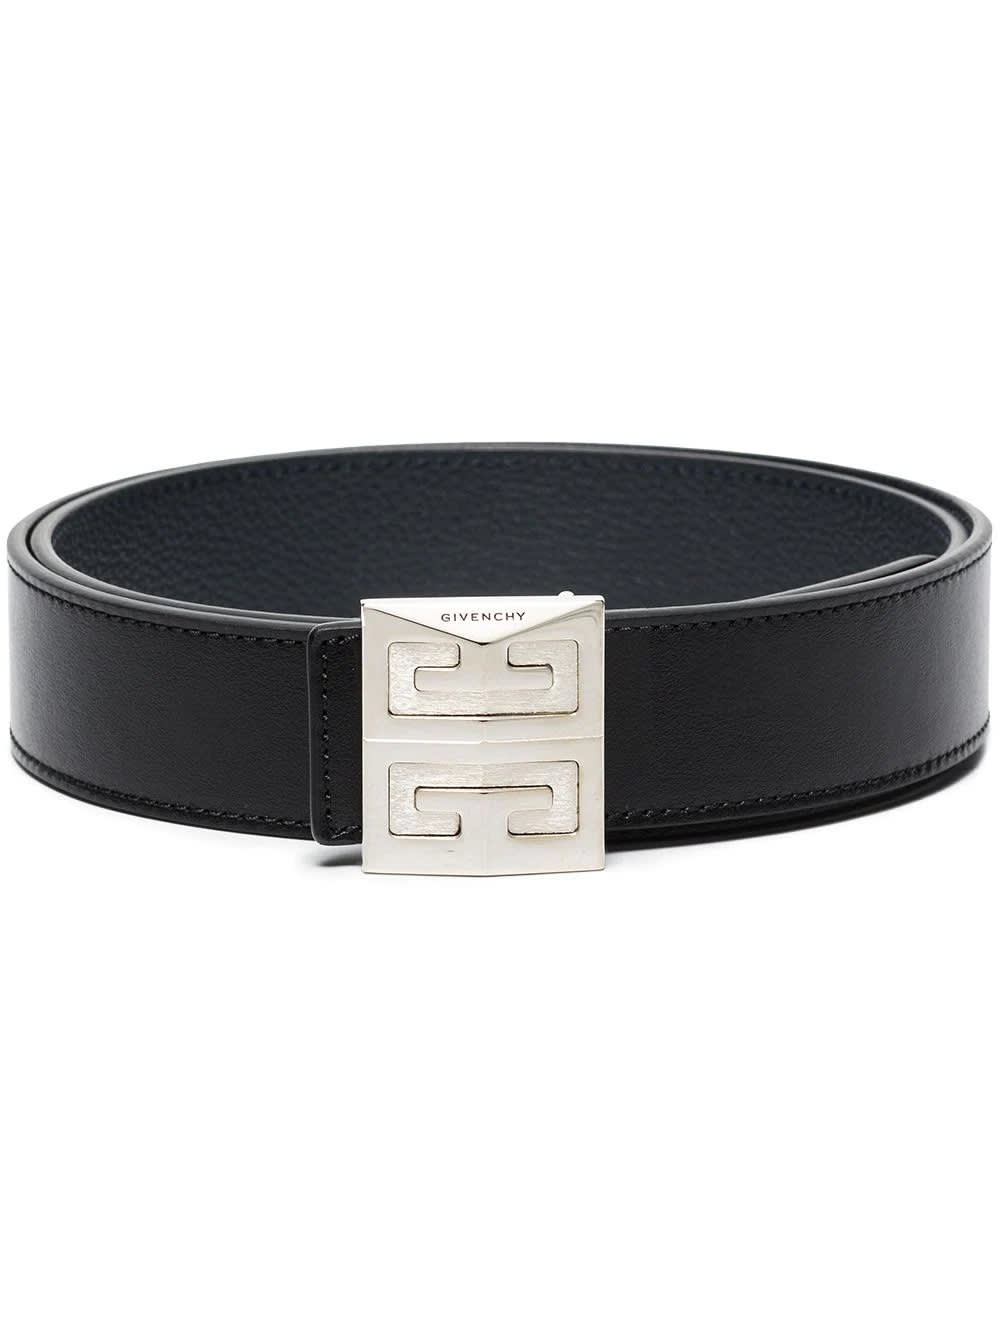 Givenchy Man 4g Reversible Belt In Black And Dark Blue Grained Leather